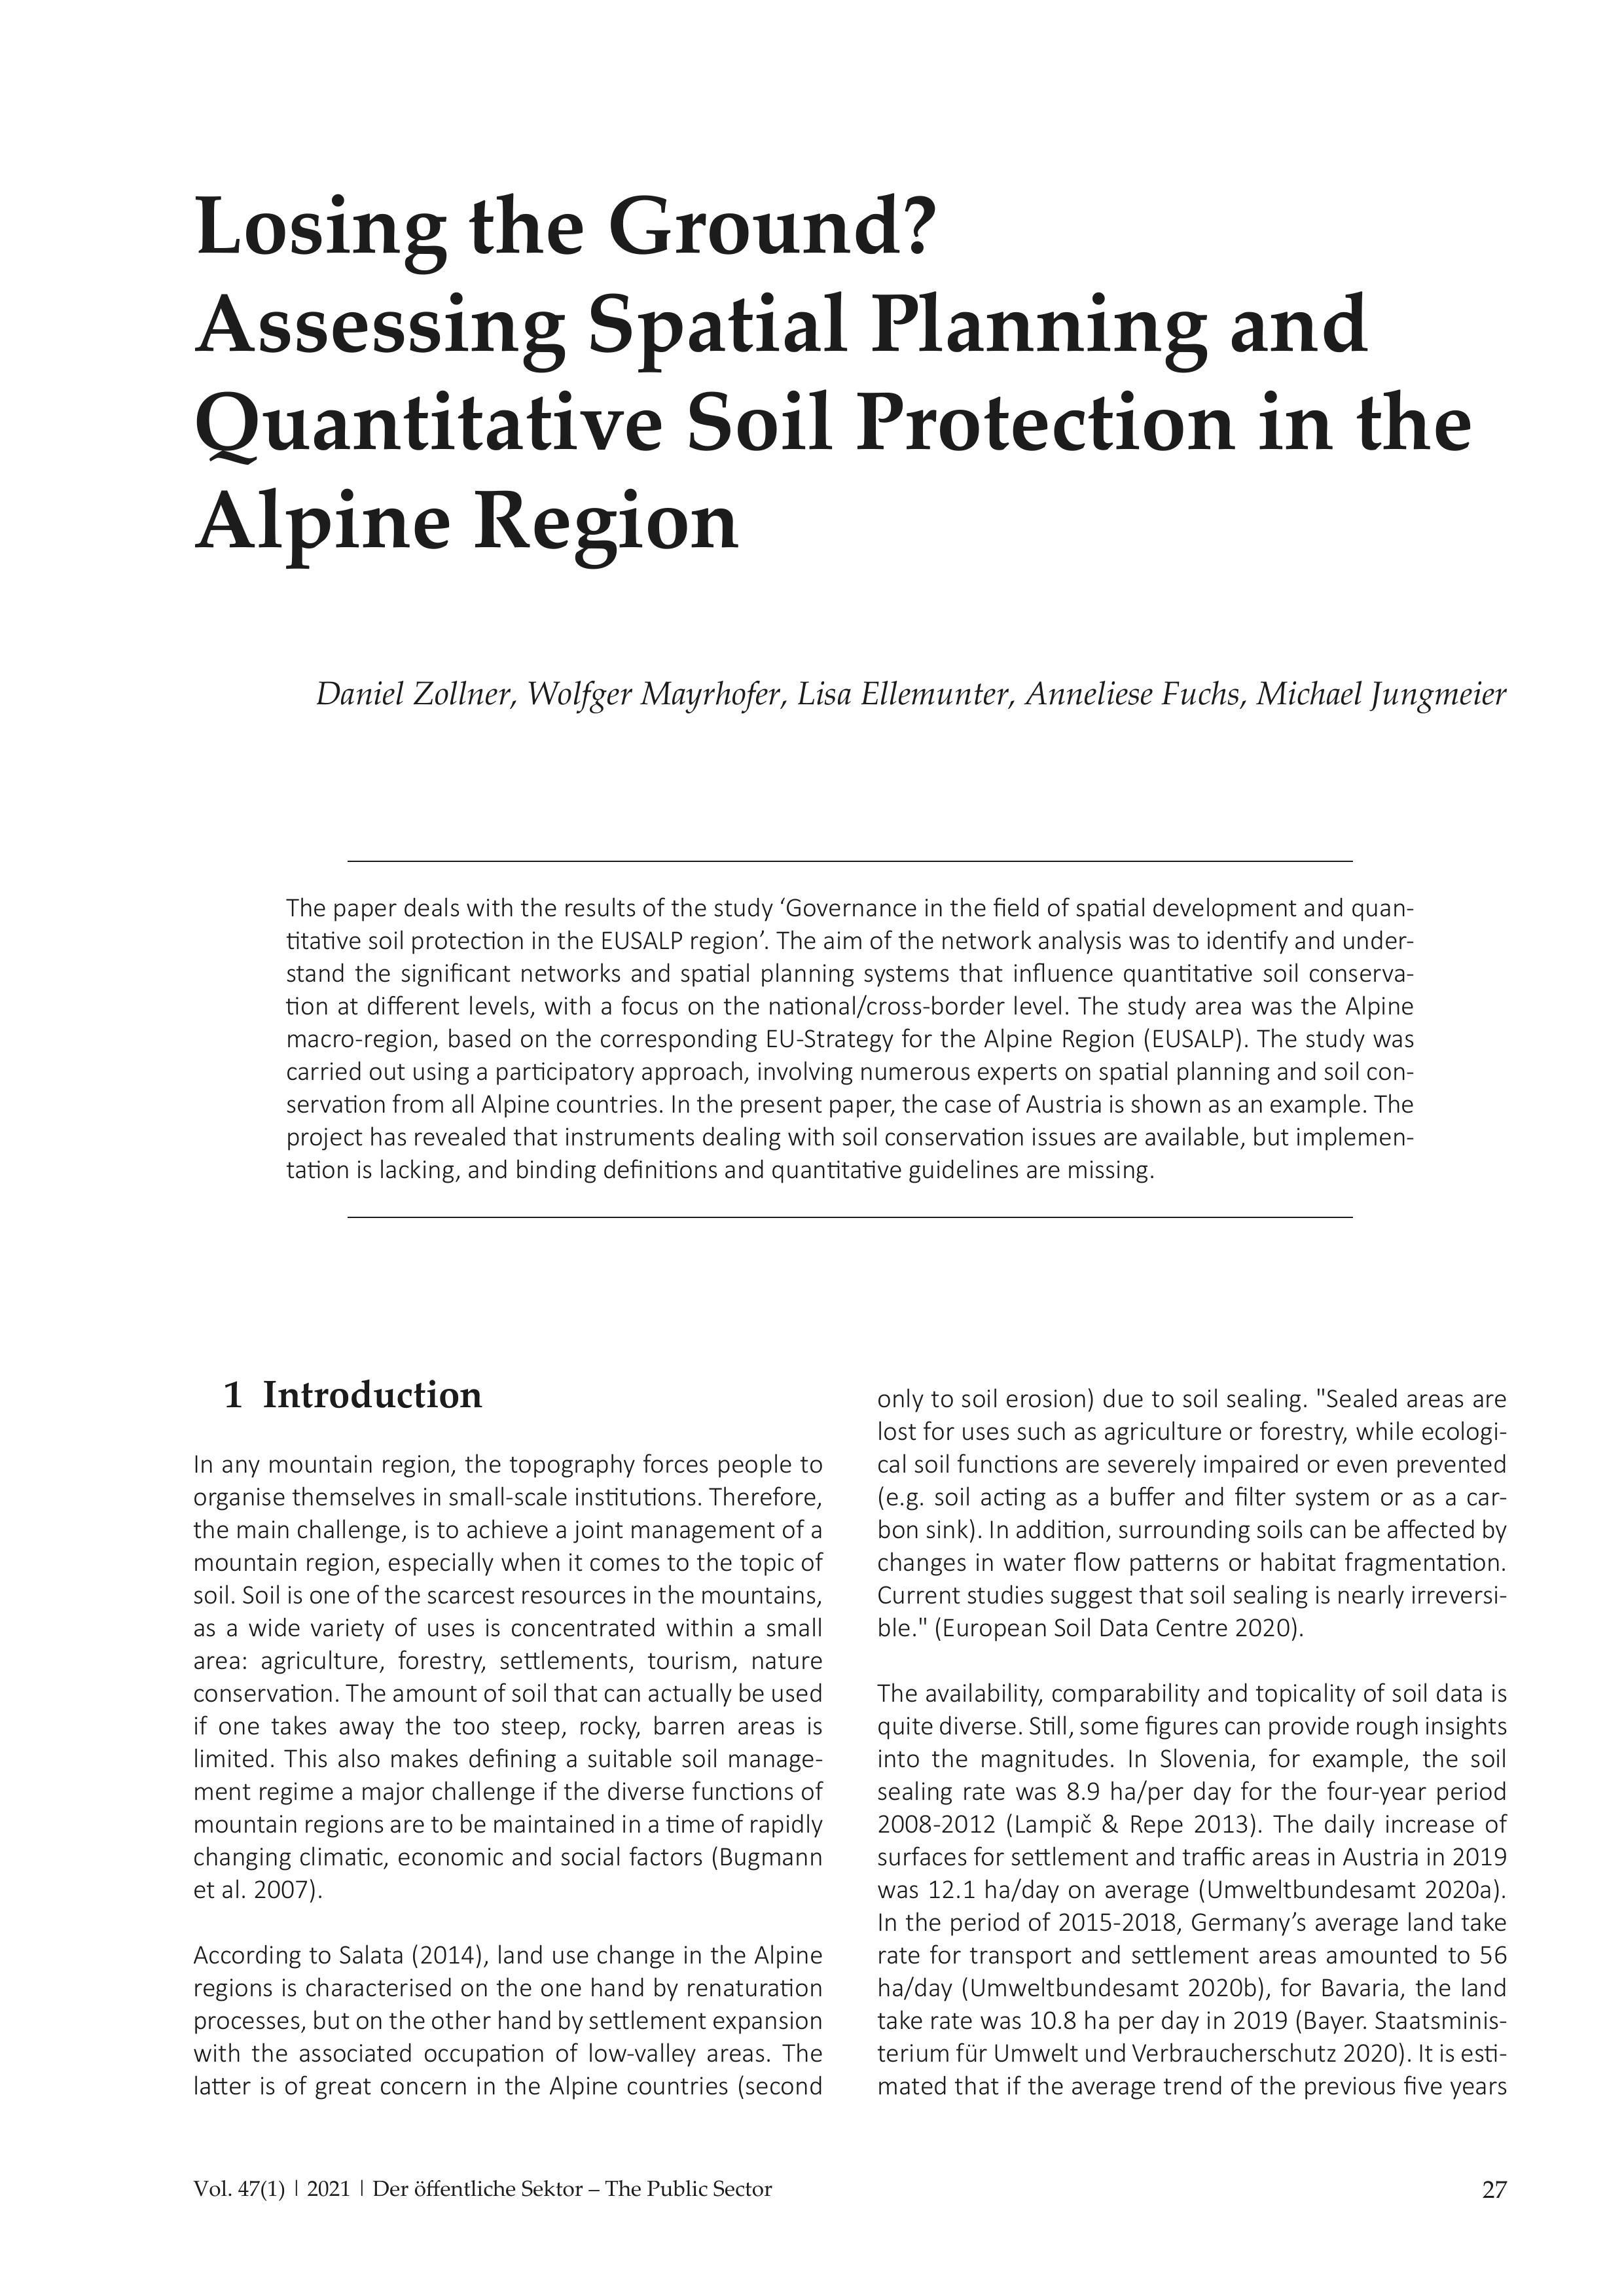 Losing the Ground? Assessing Spatial Planning and Quantitative Soil Protection in the Alpine Region